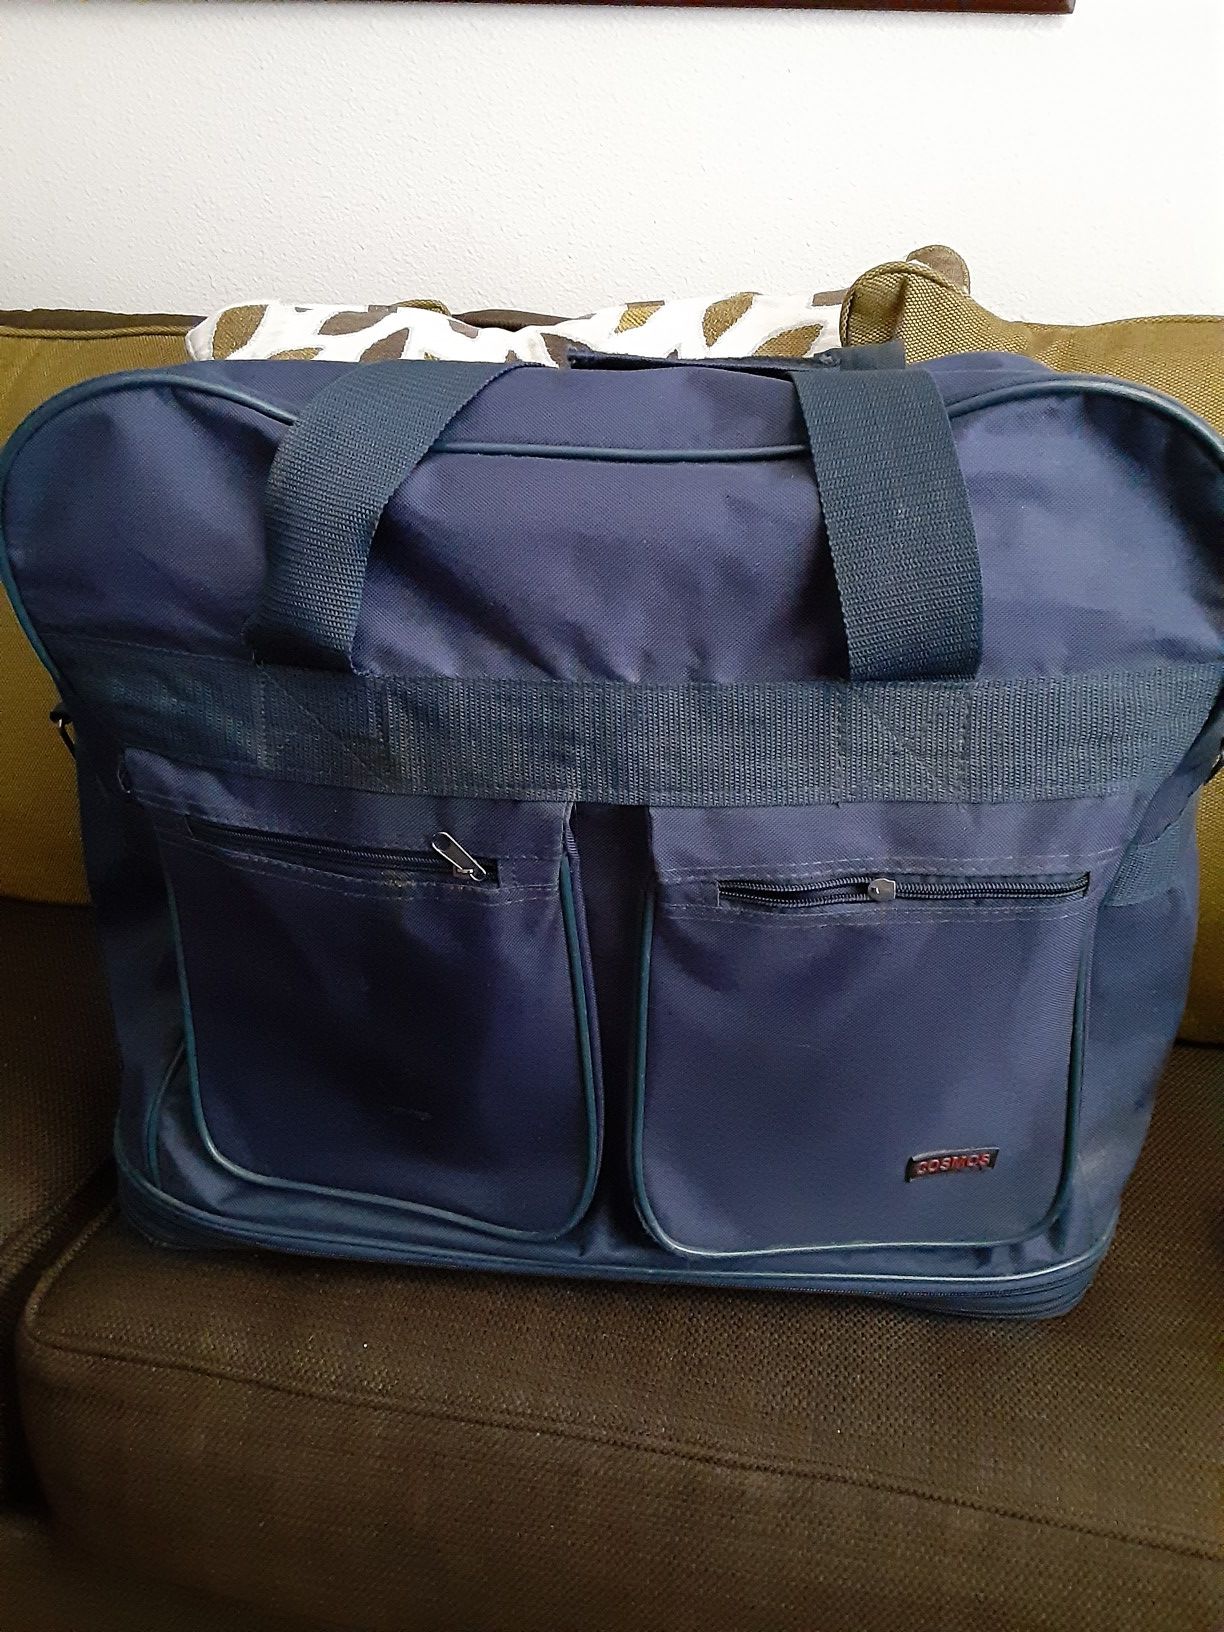 Large travel bag 23 in Long by 19 high 5 Rolling Wheels